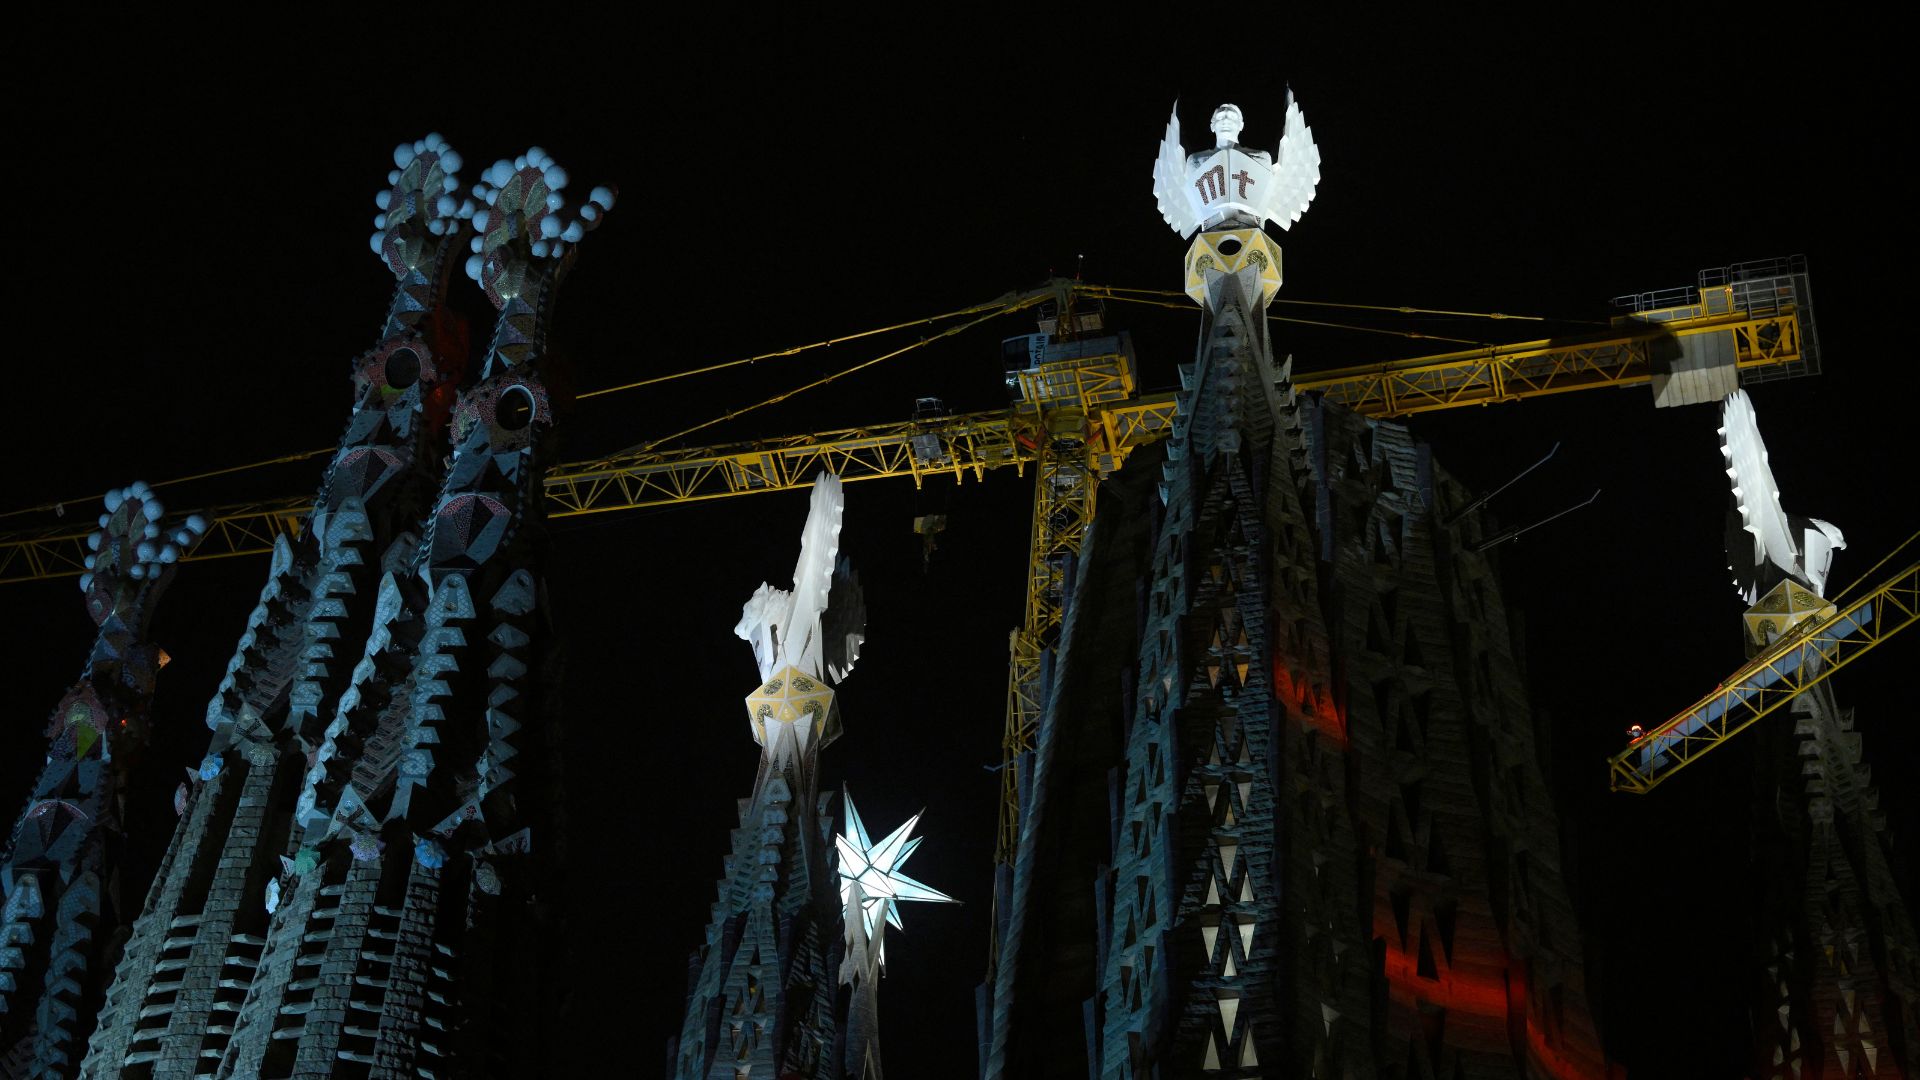 The Sagrada Familia basilica's towers of the Evangelists are lit up for the first time. /Josep Lago/AFP